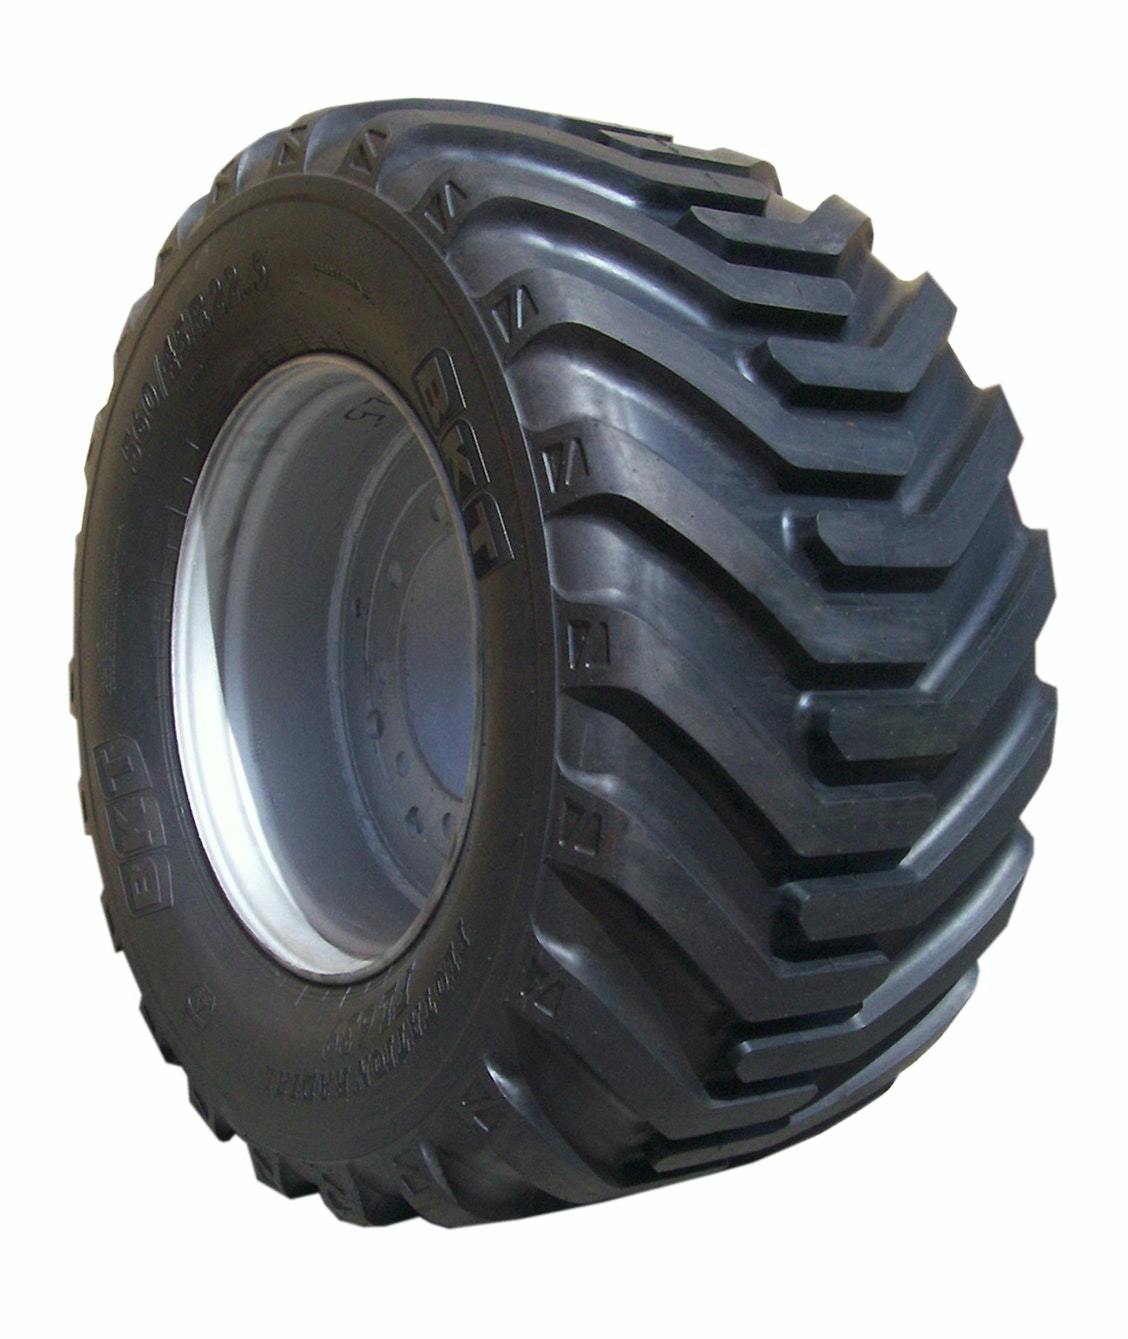 three-new-n-american-sizes-from-bkt-tires